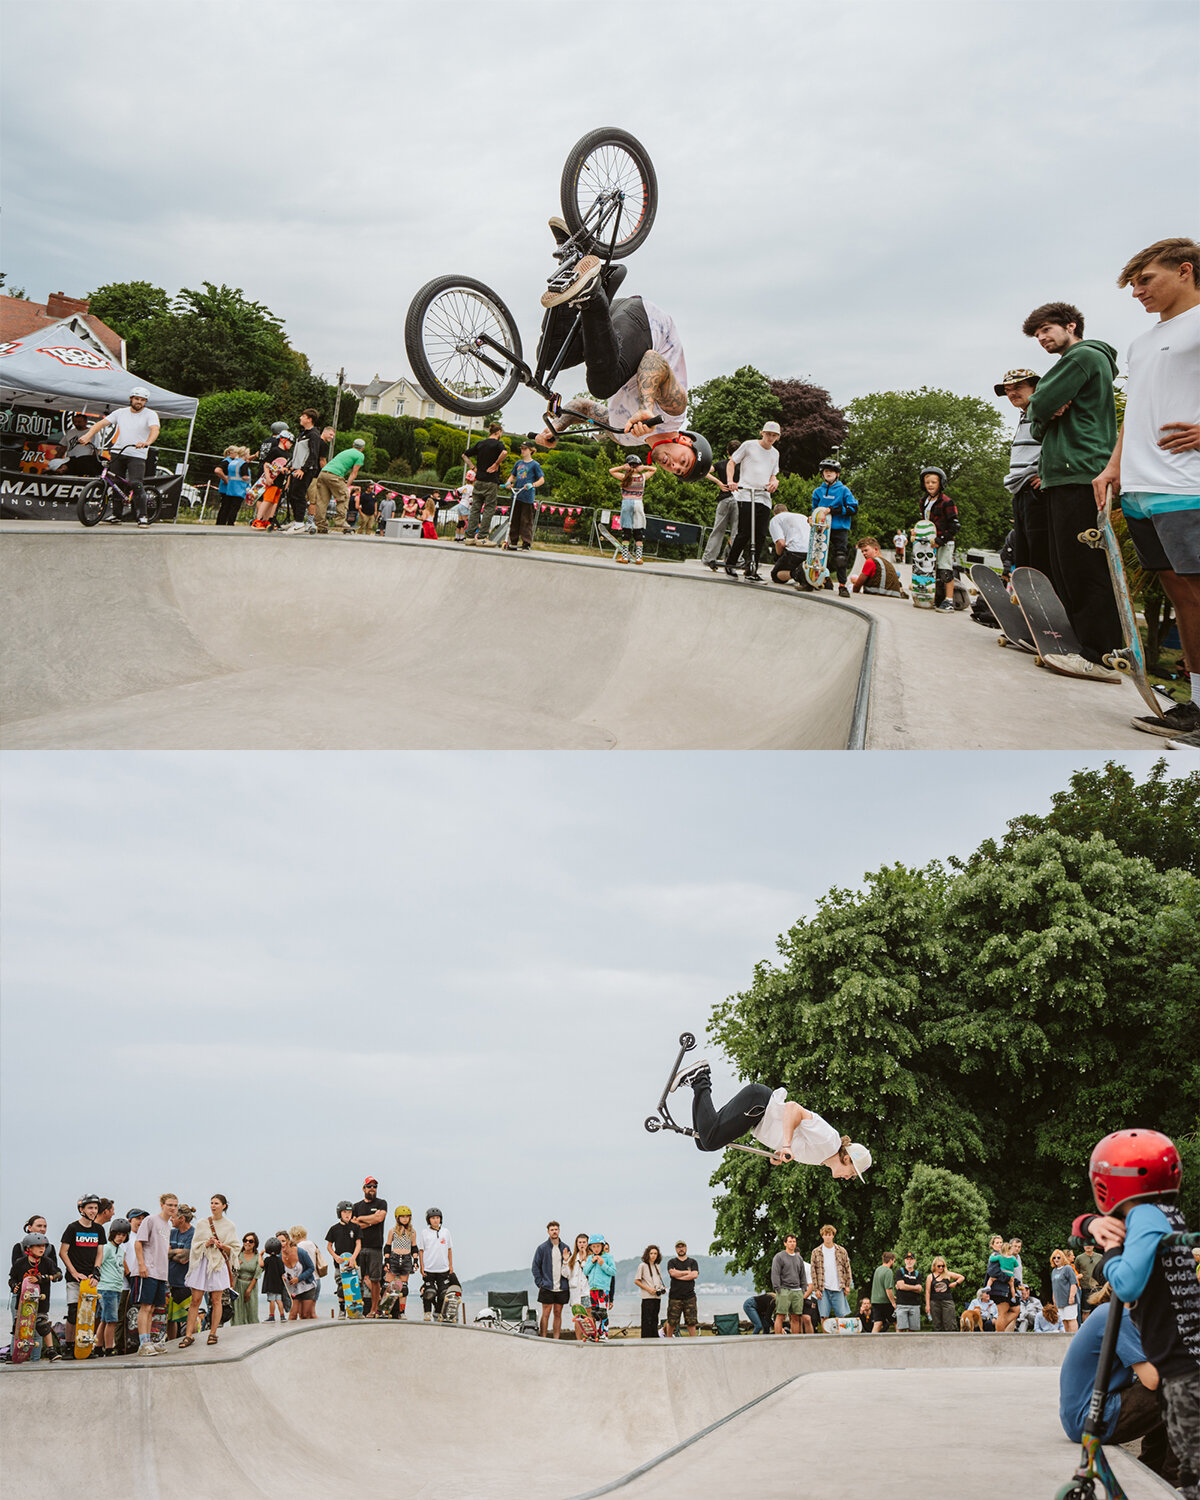 It's been a pleasure capturing the build progress of the new skate park for @mumbles_community_council. Here's a look at some action shots from the opening weekend and a few progress photos from the build 📷

#photography #promotionalphotography #sit